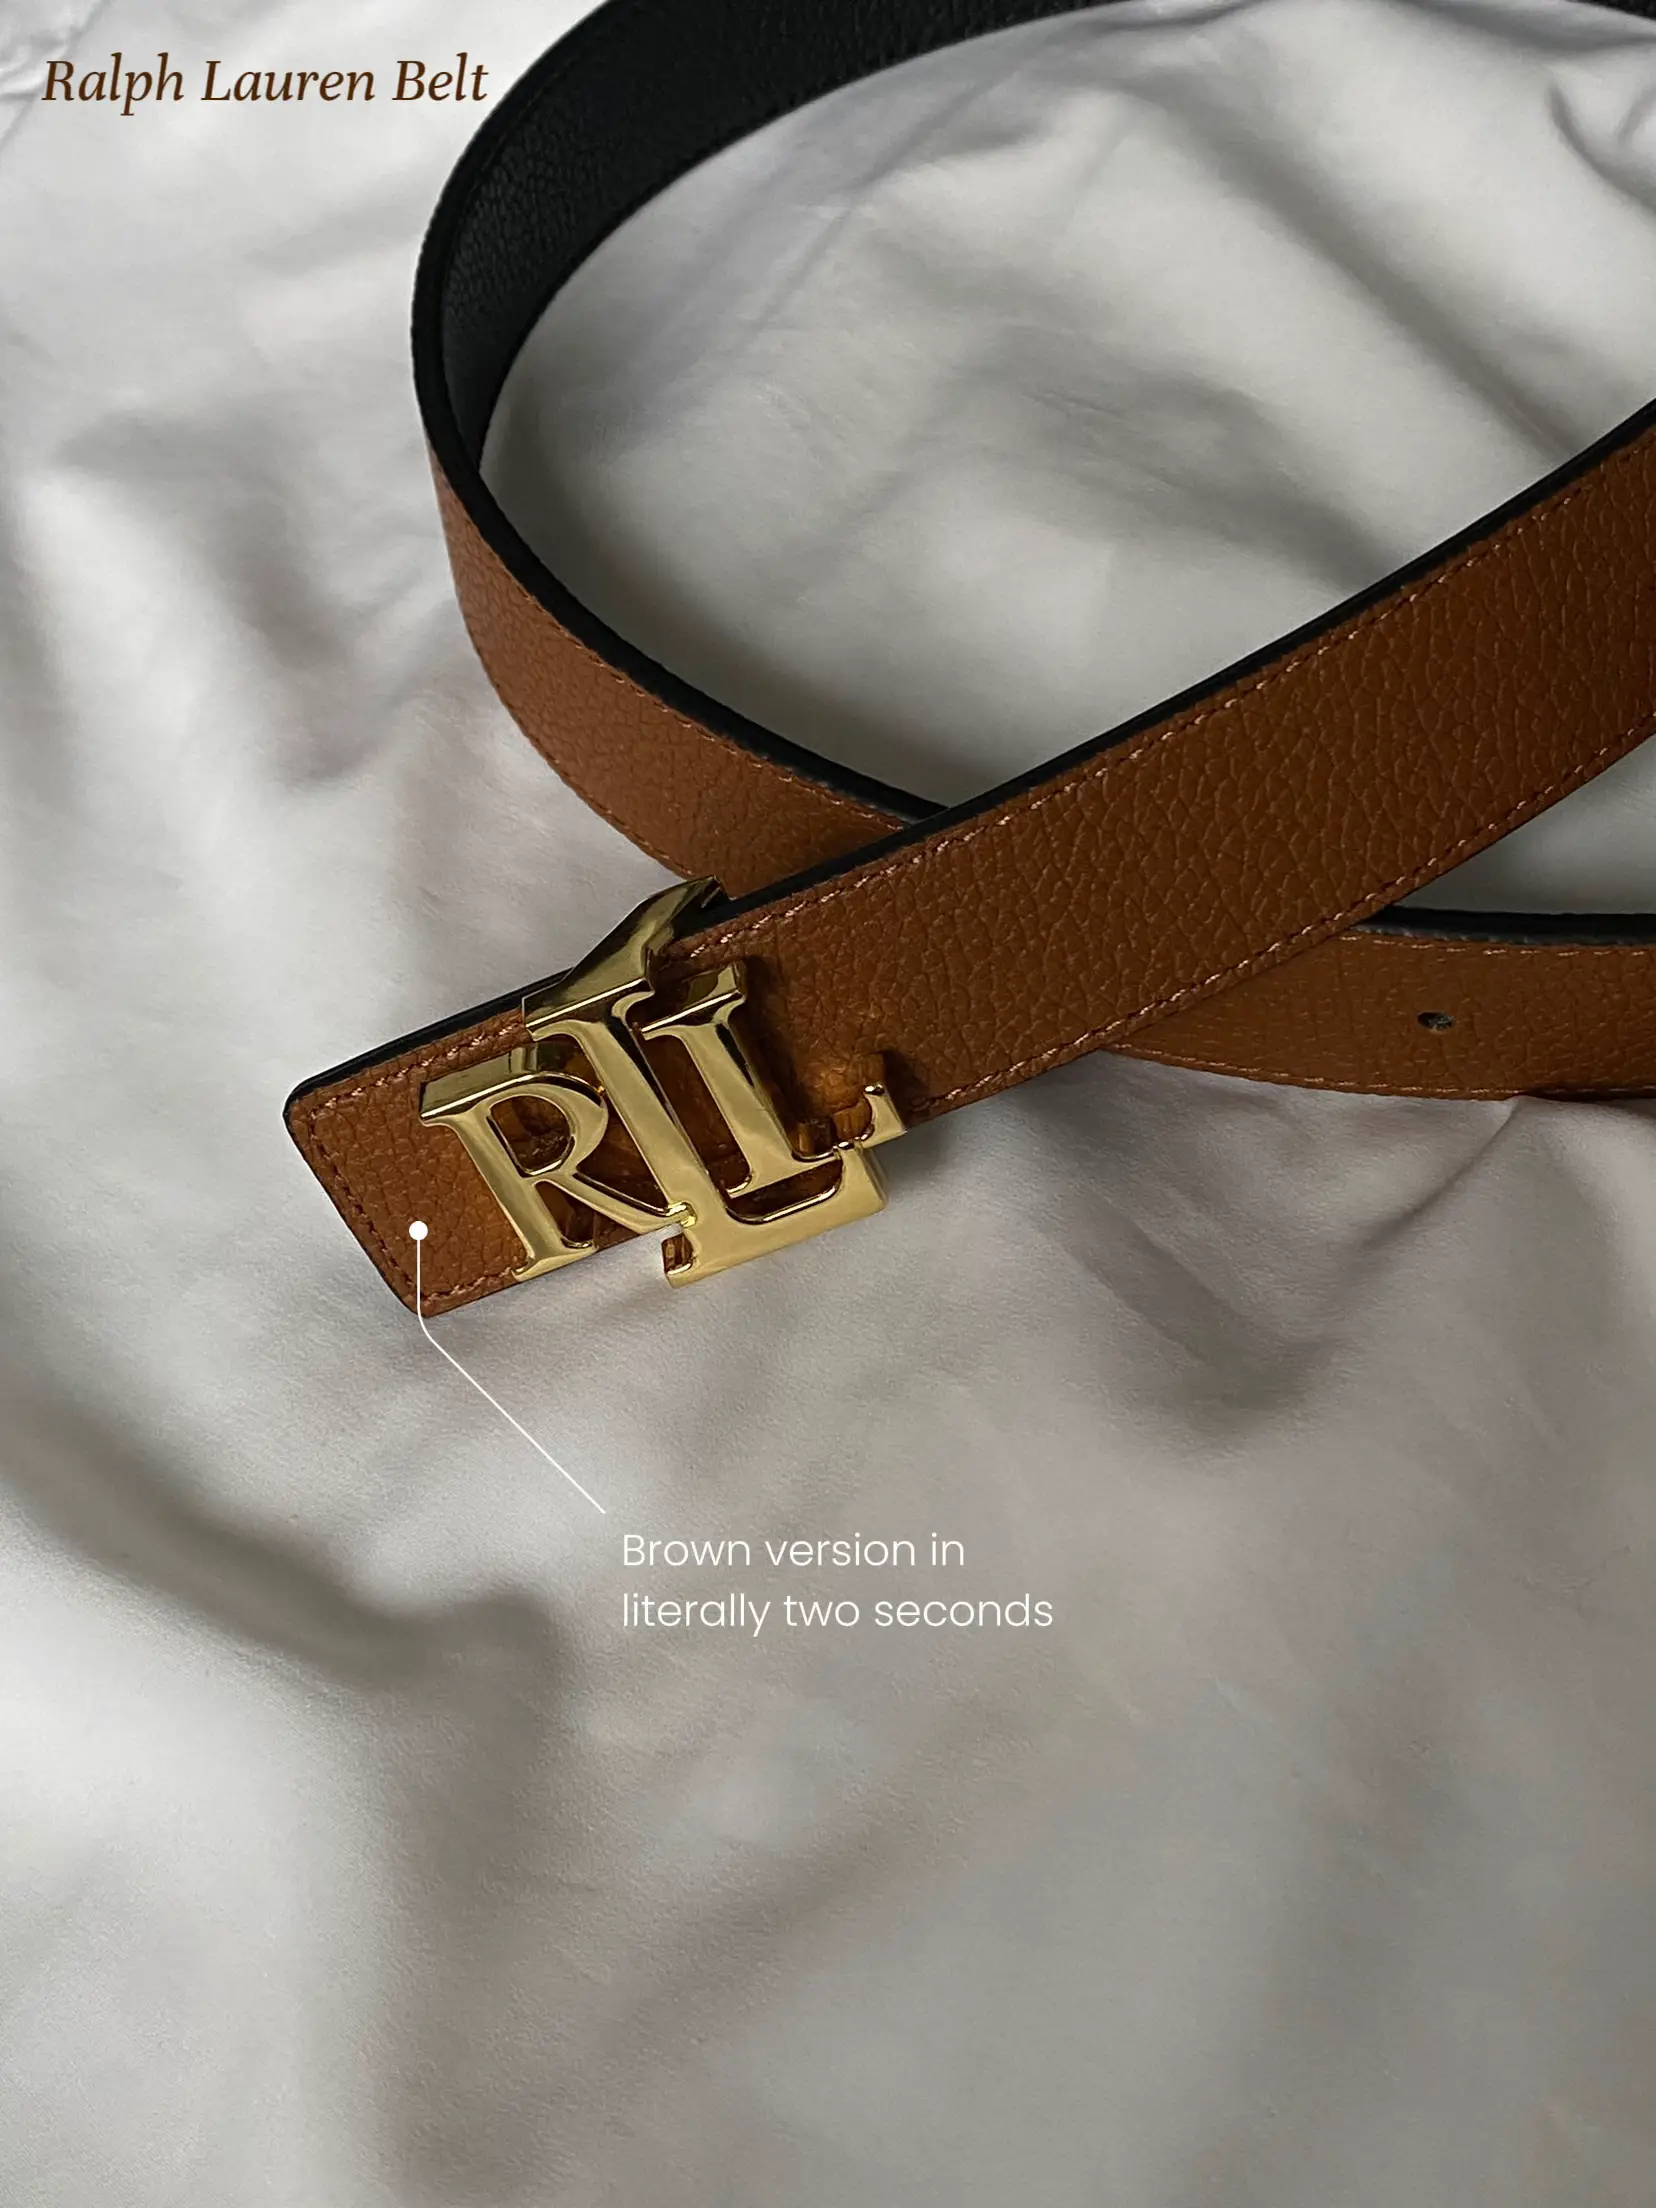 Honest Review: Ralph Lauren Belt, Gallery posted by Olivia Węgier